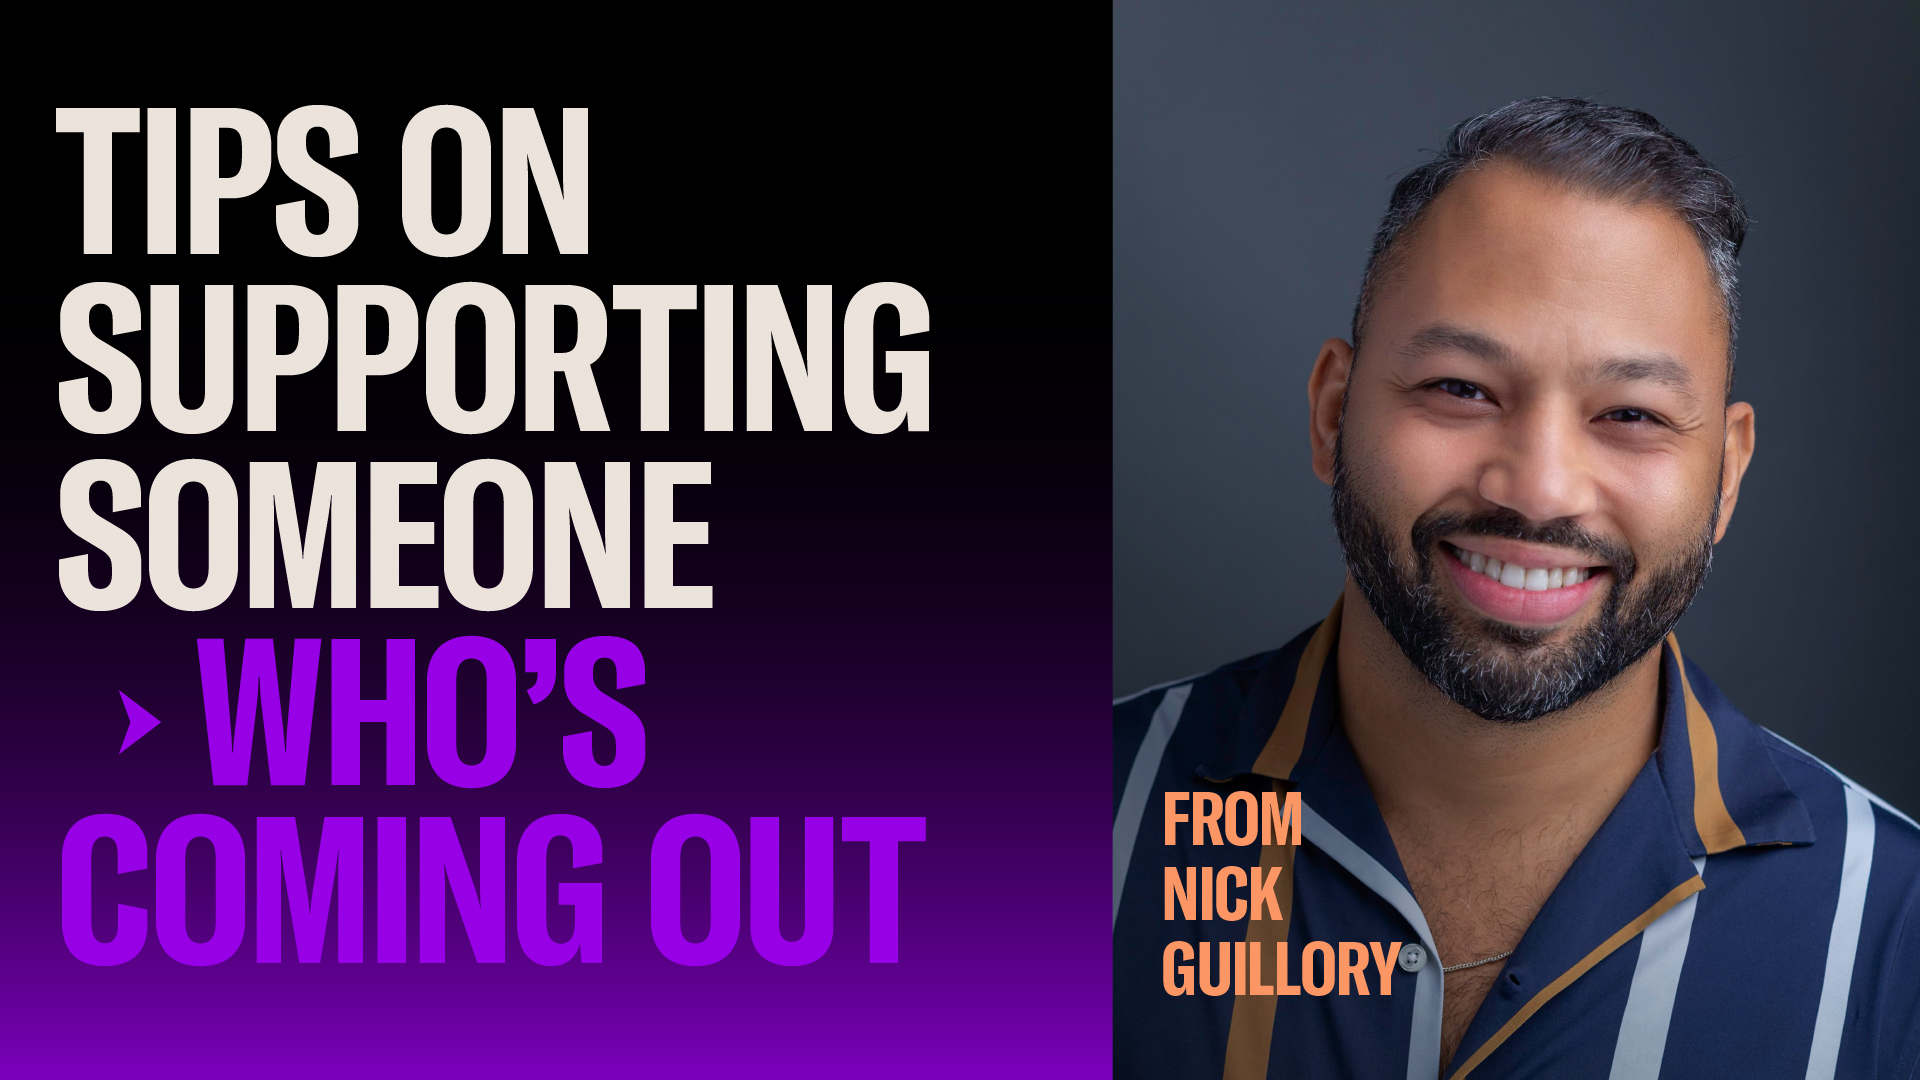 TIPS ON SUPPORTING SOMEONE COMING OUT FROM NICK GUILLORY  Nick Guillory is a self-made entrepreneur currently running his own social media agency. He also serves as a social media consultant to the Human Rights Campaign.